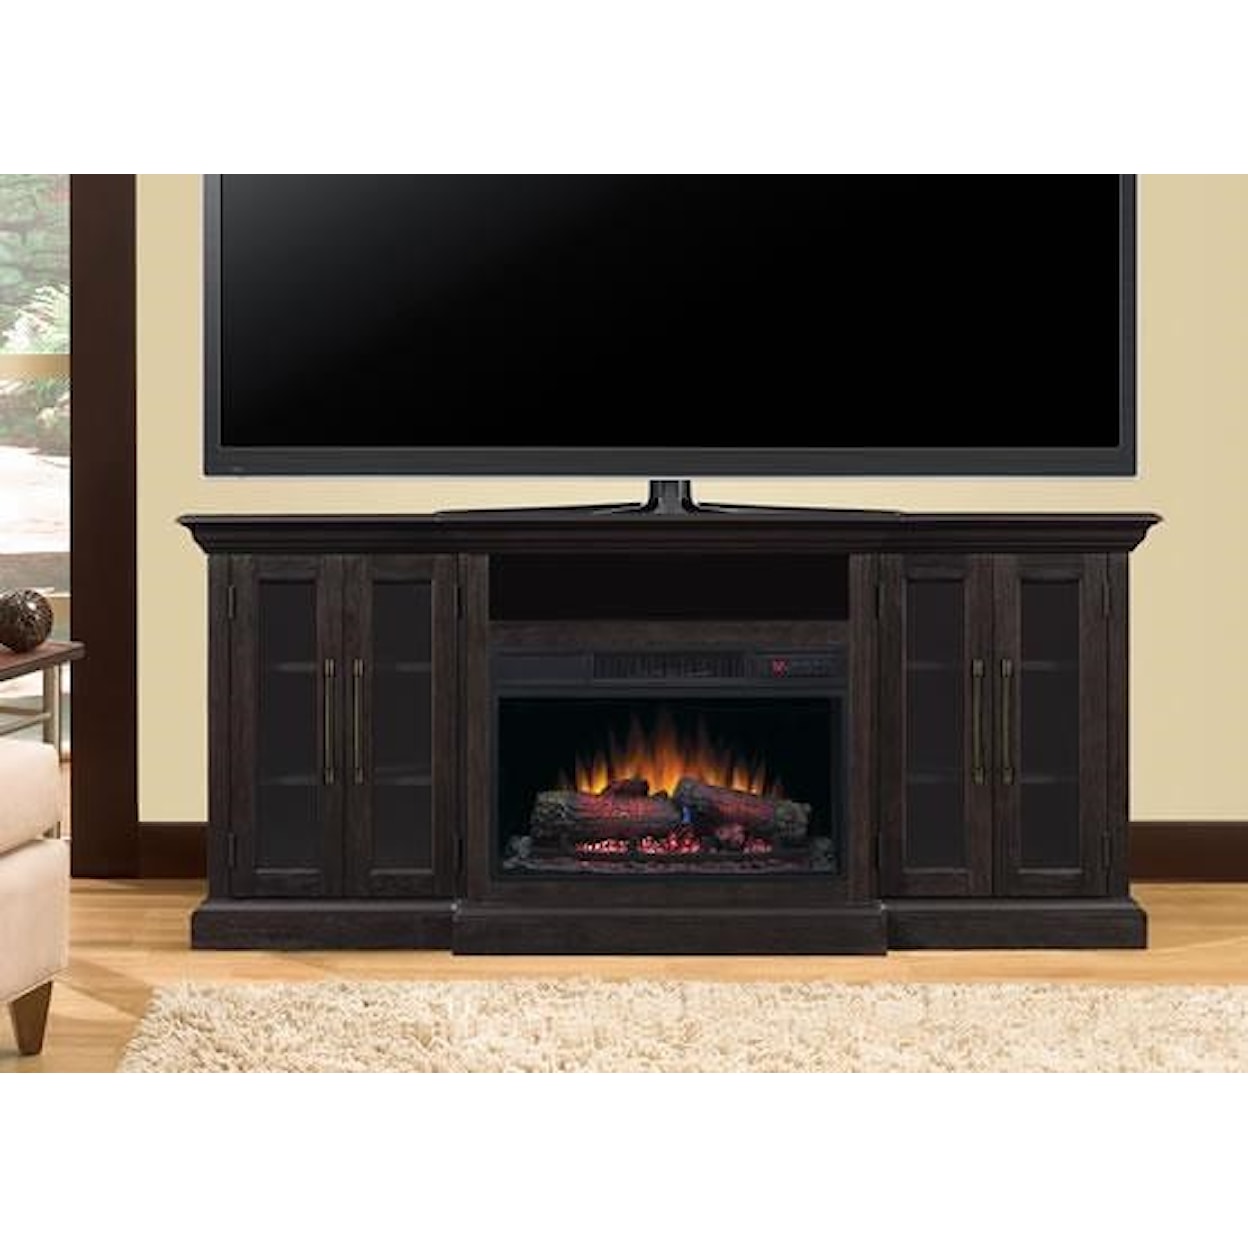 ClassicFlame Grand TV Stand with Fireplace Insert